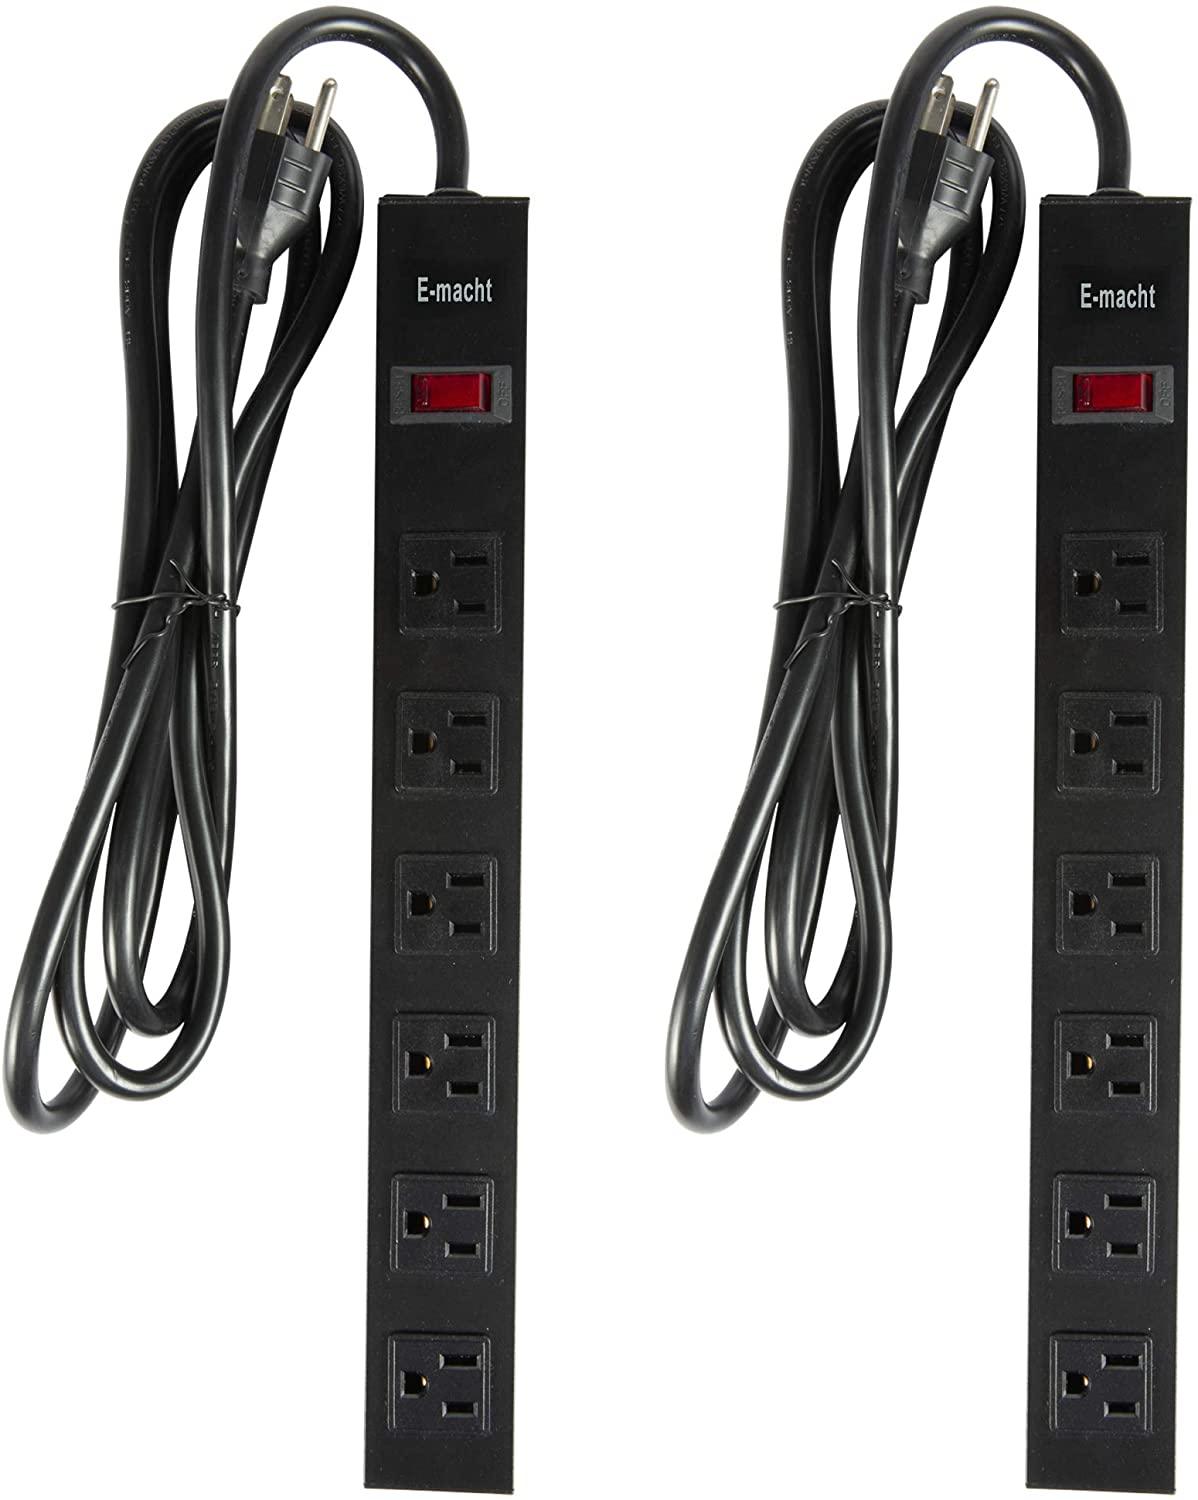 2 Pack Long Power Strip Surge Protector, 6 Outlets Metal Heavy Duty Power Outlet, Wall Mountable with Hook & Loop, 6 ft Long Extension Cord, Black - Bosonshop